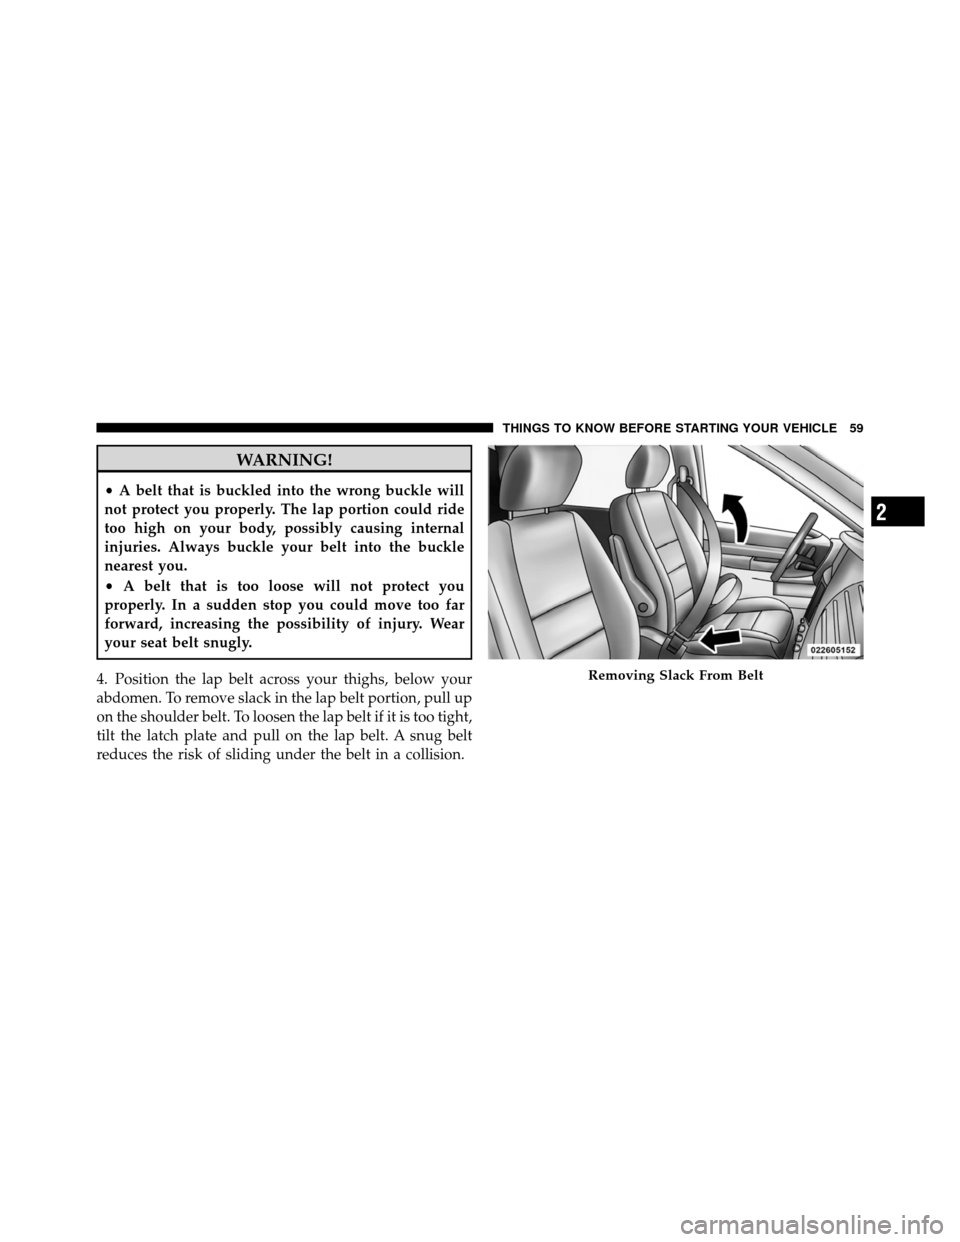 DODGE GRAND CARAVAN 2012 5.G Owners Manual WARNING!
•A belt that is buckled into the wrong buckle will
not protect you properly. The lap portion could ride
too high on your body, possibly causing internal
injuries. Always buckle your belt in